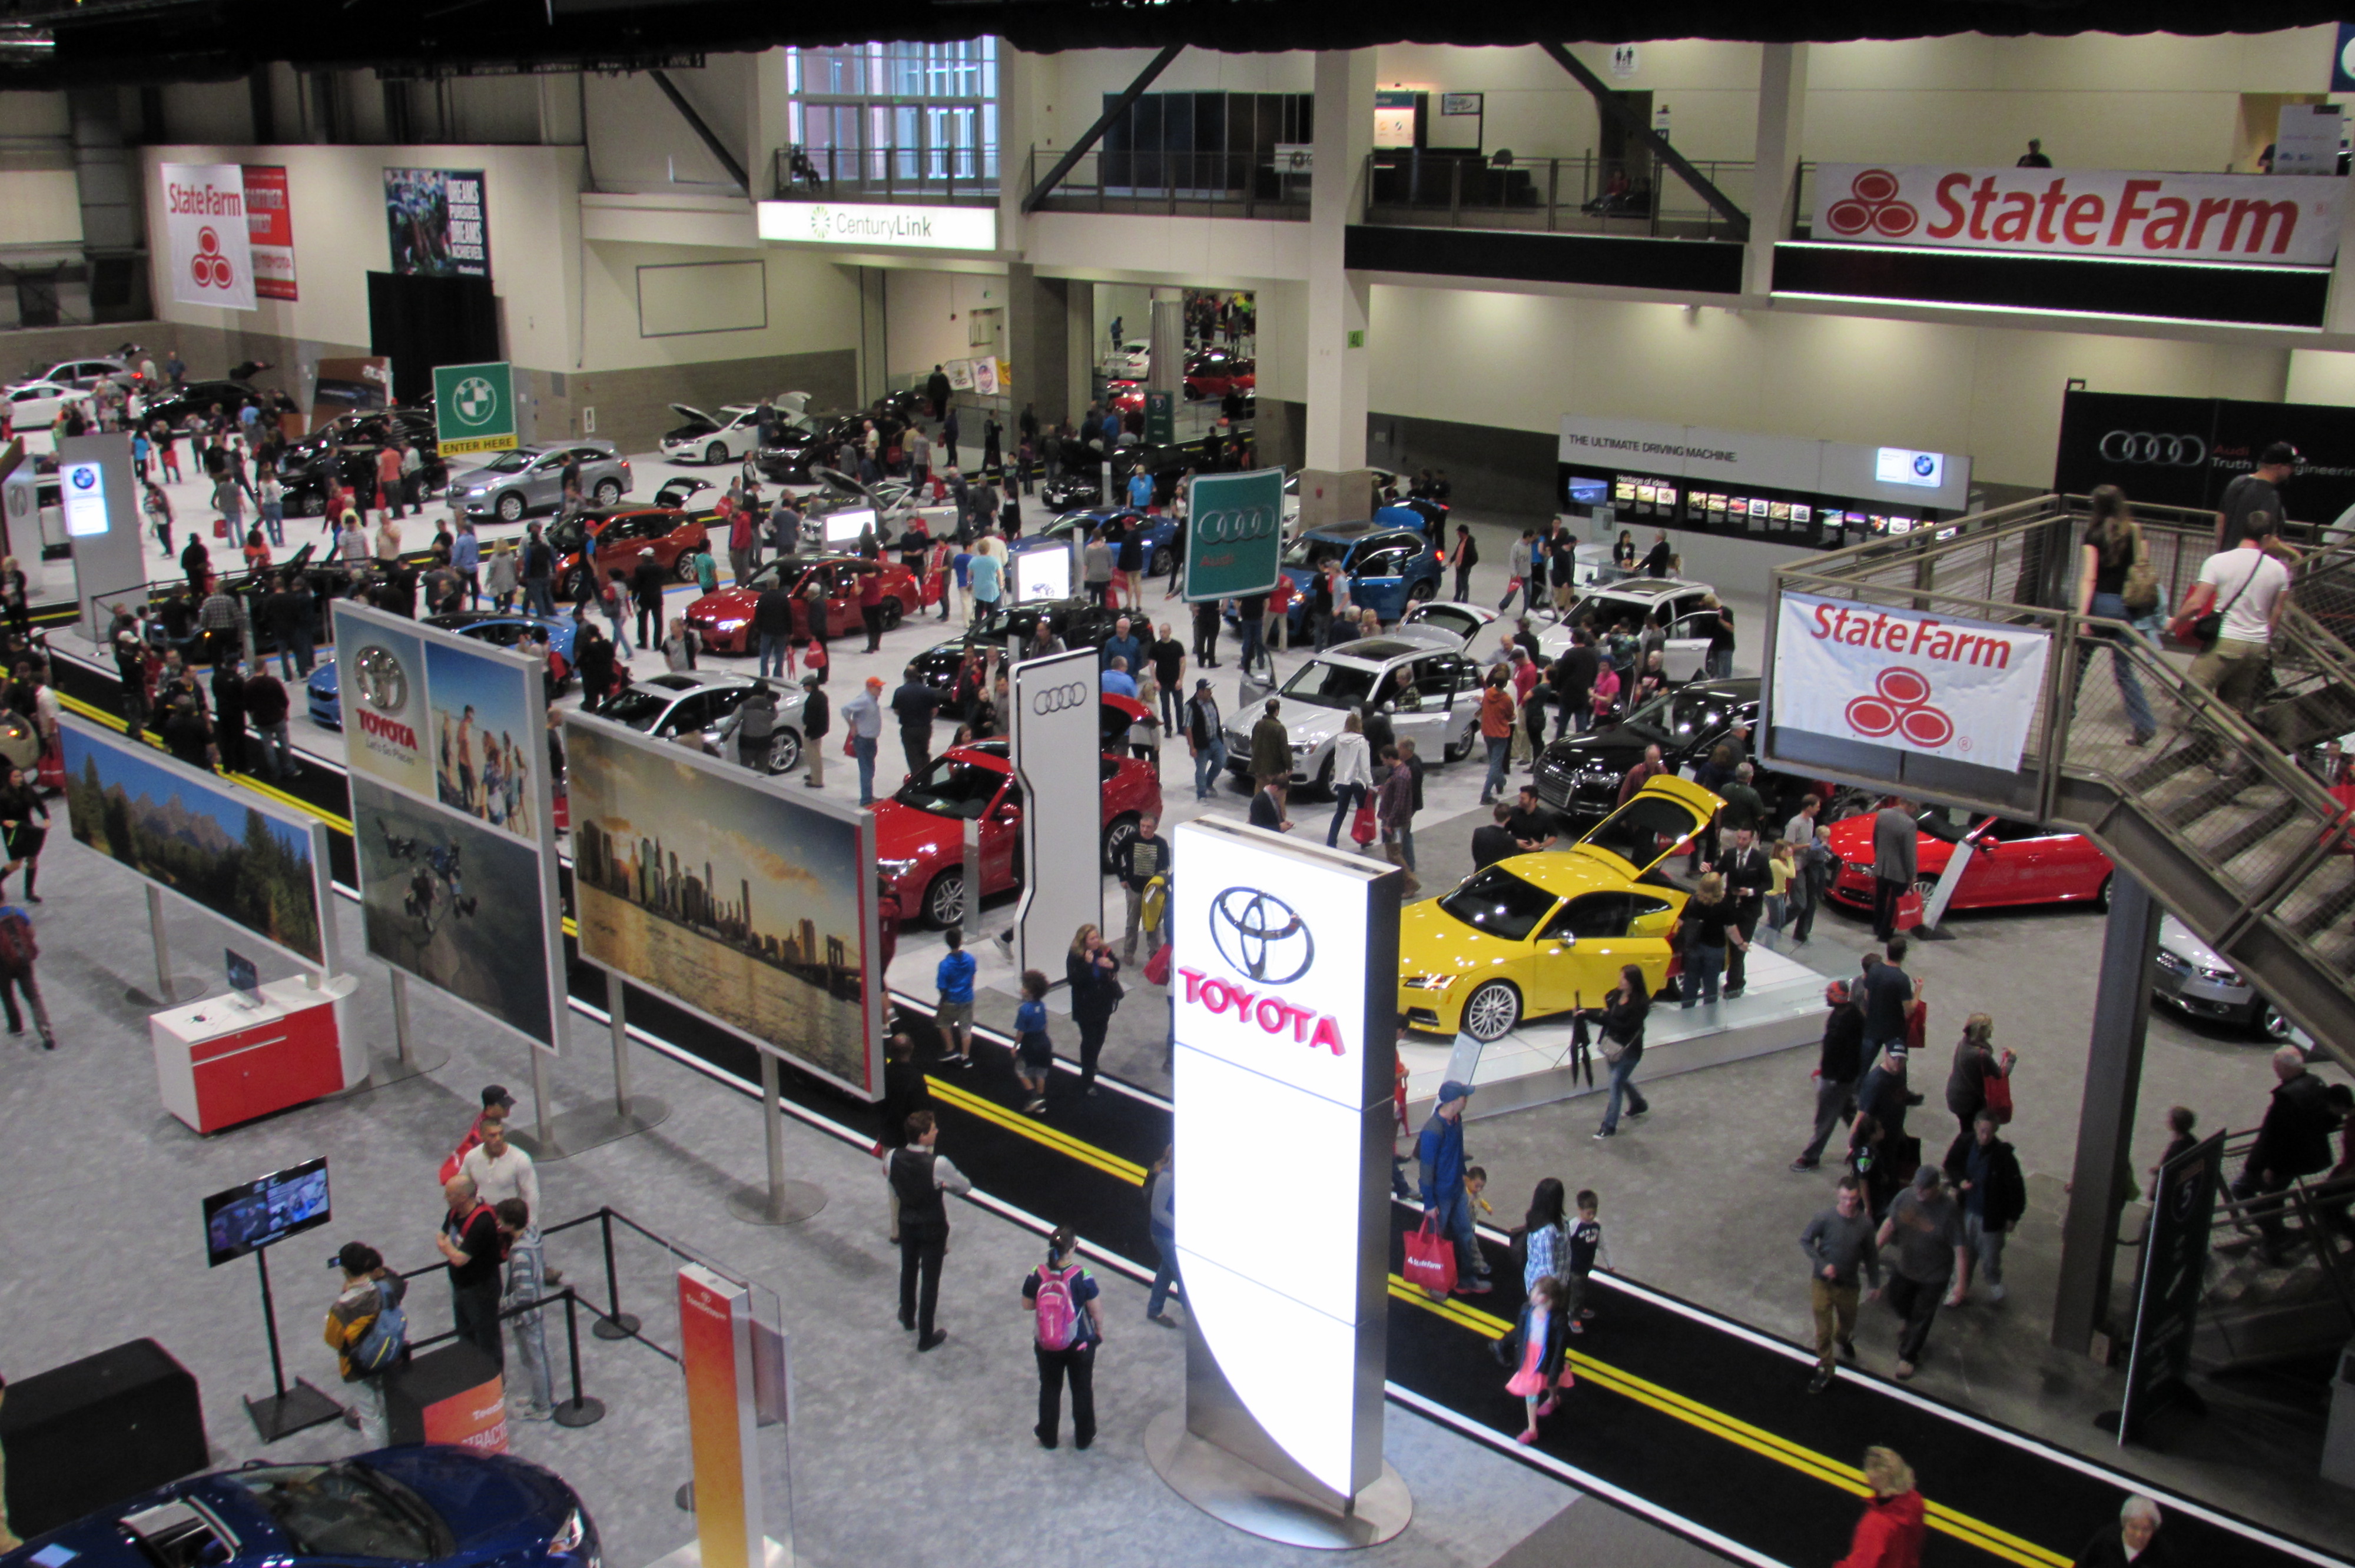 At the Seattle International Auto Show attendees can check out the latest technologies in more than 500 new vehicles and test drive over 75 different vehicles